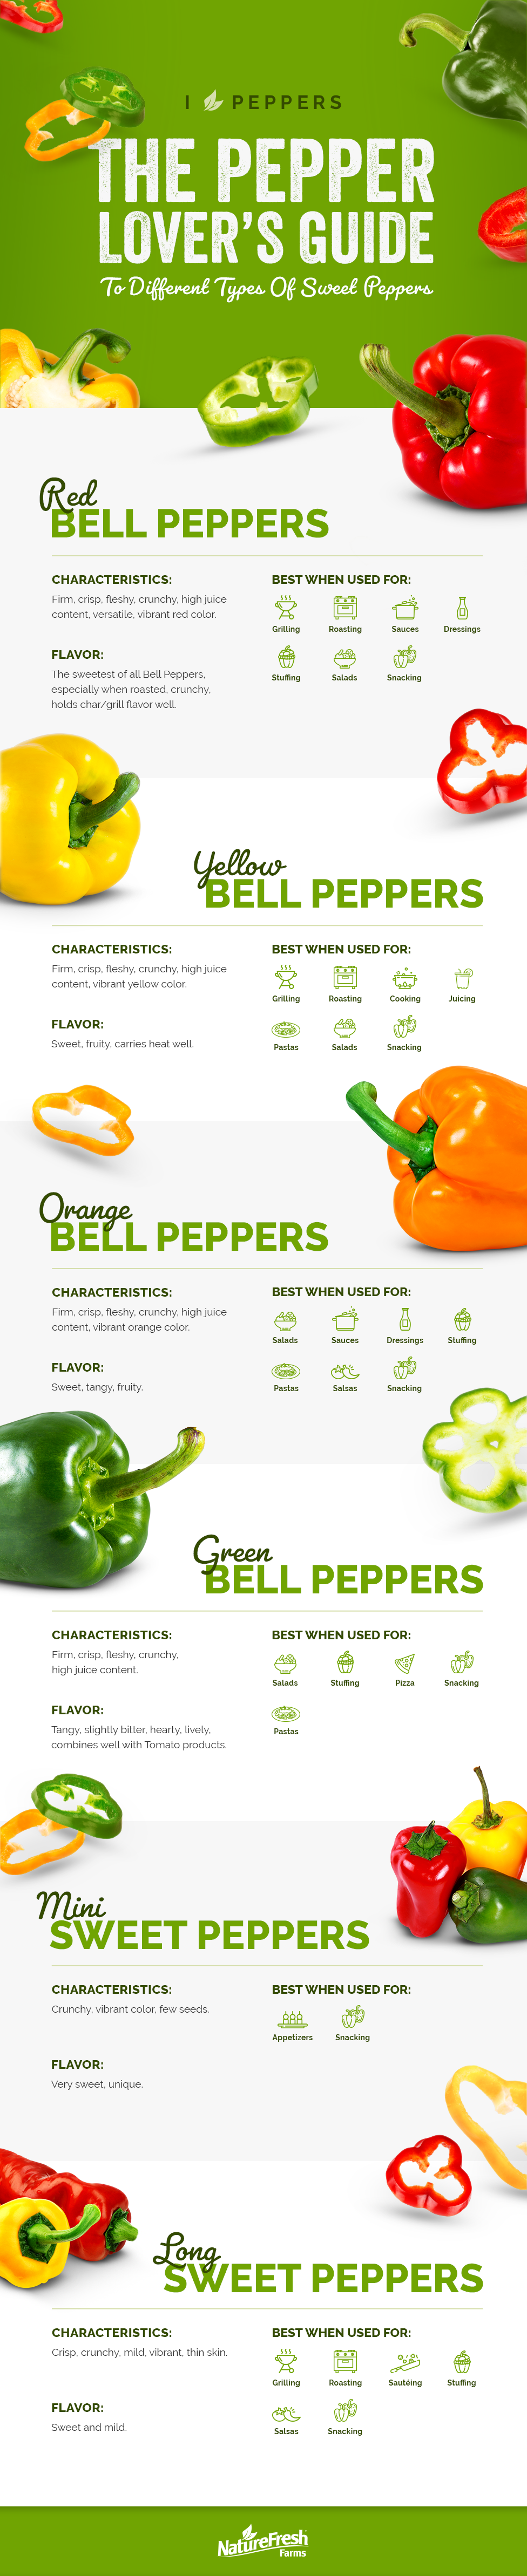 The Guide To Different Types Of Sweet Bell Peppers (Infographic)